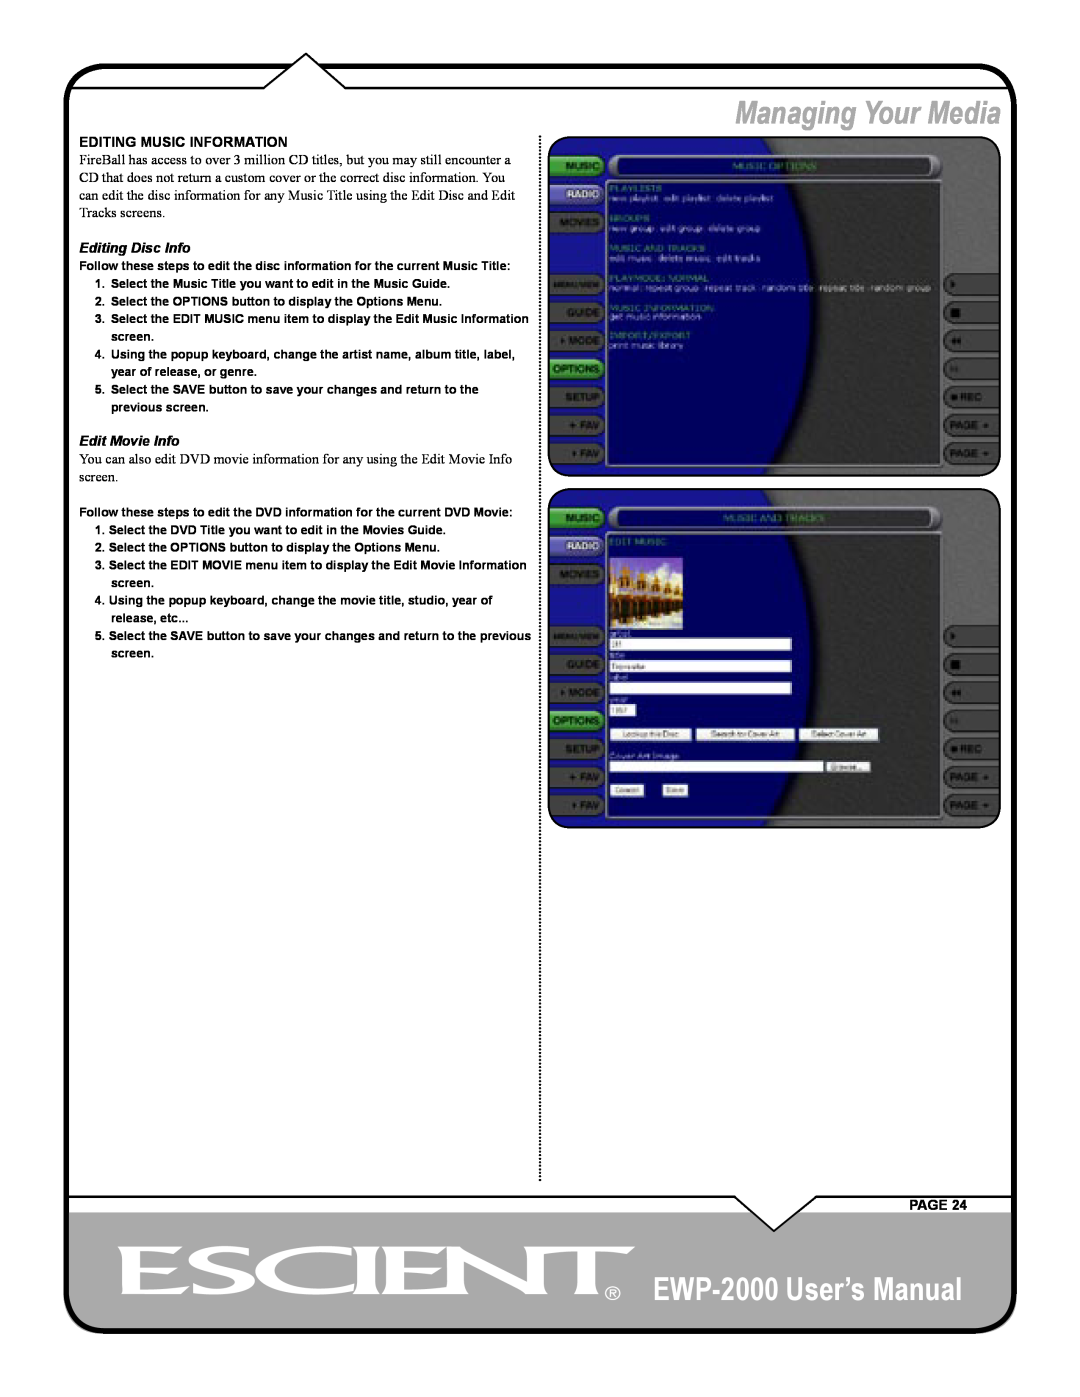 Escient user manual Managing Your Media, EWP-2000 User’s Manual, Editing Music Information, Page 